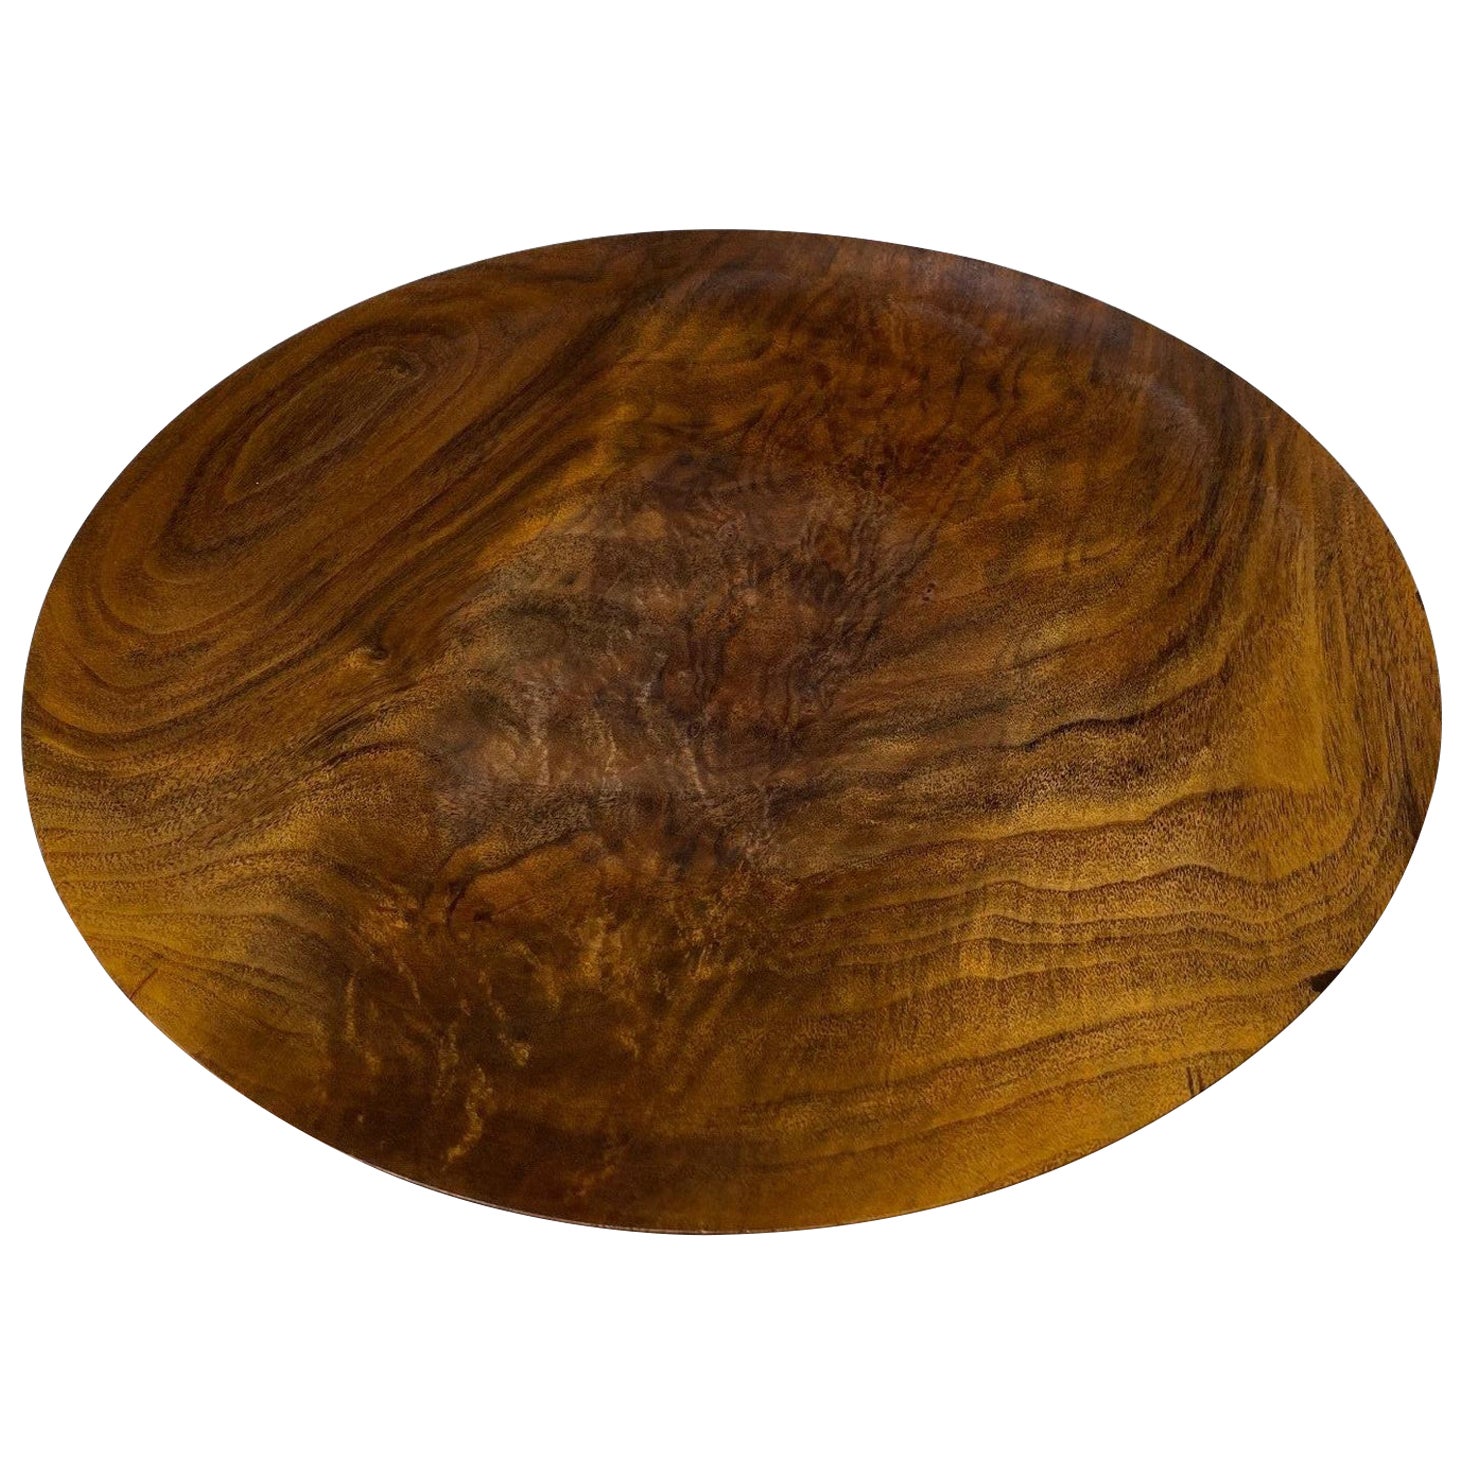 Bob Stocksdale Signed Mid-Century Modern Turned Walnut Wood Charger Platter For Sale